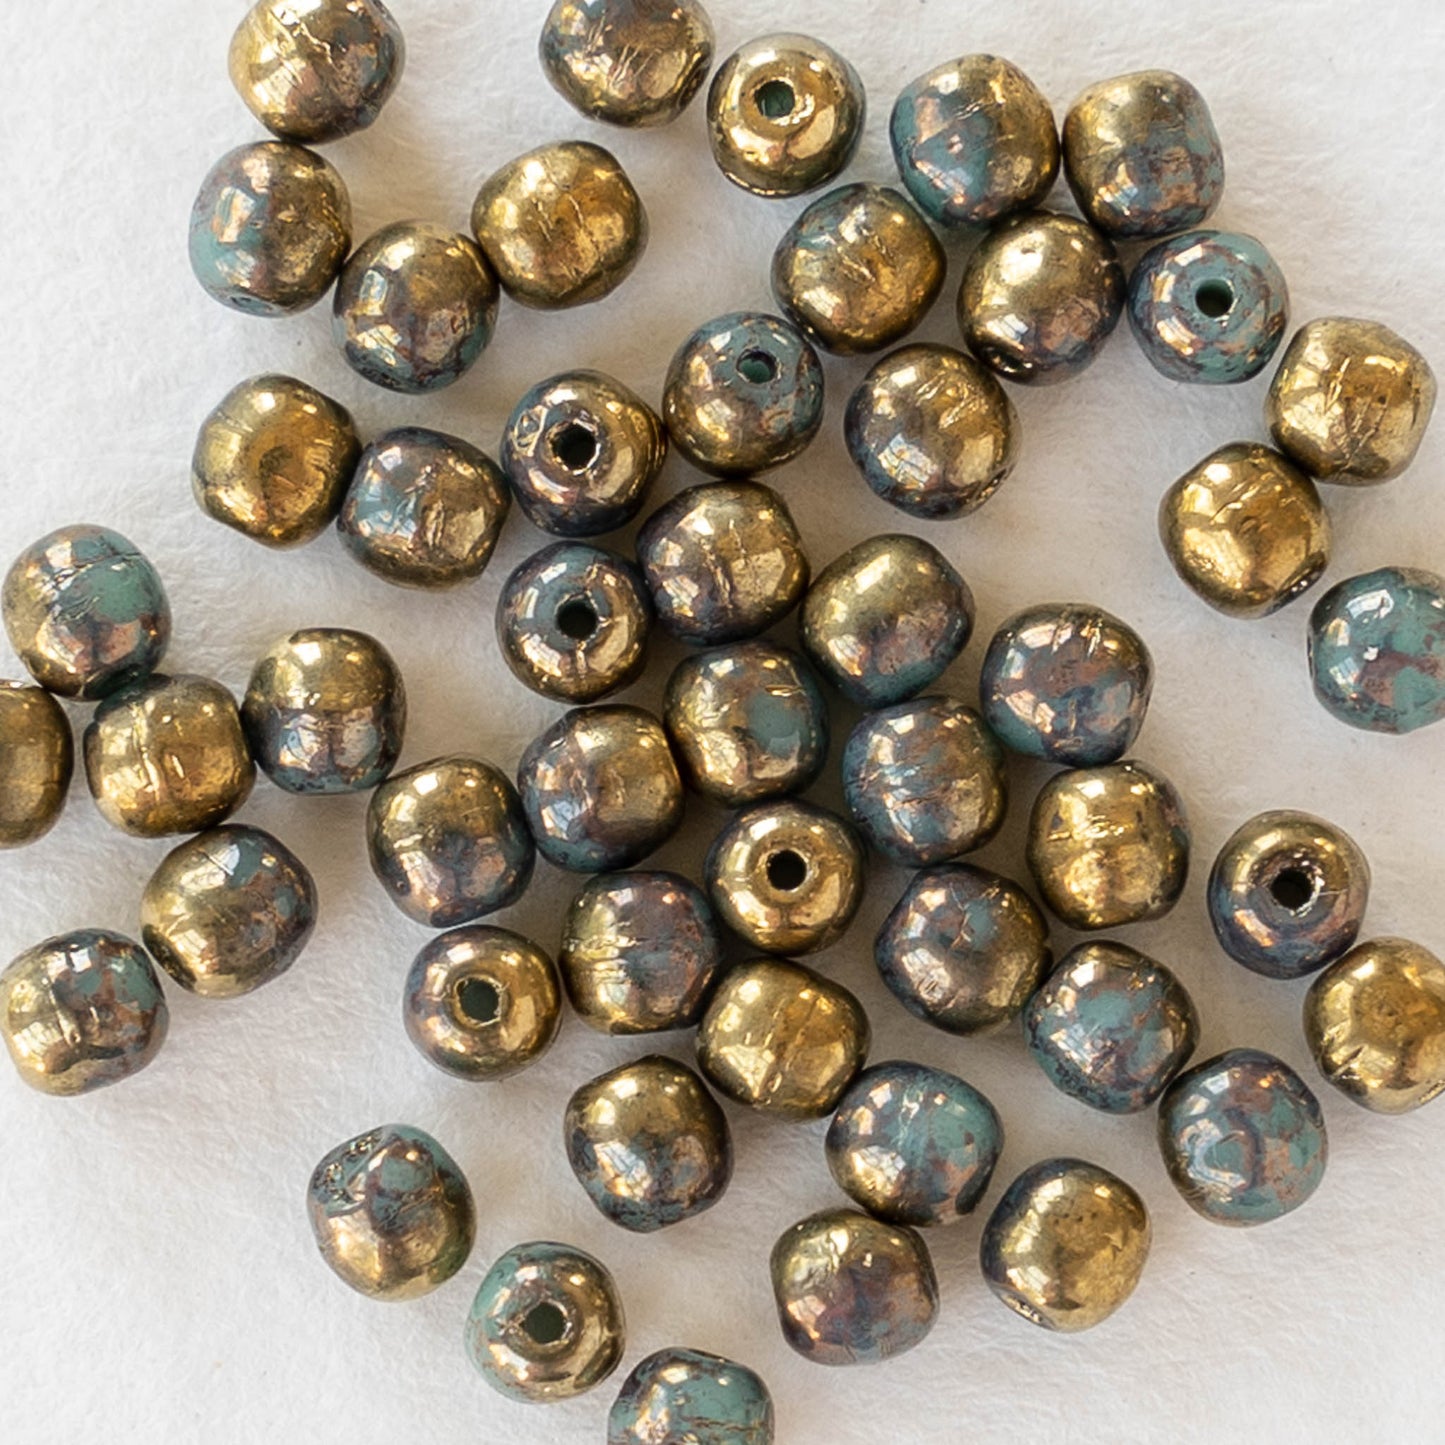 3mm Round Glass Beads - Teal with Gold Finish - 50 Beads